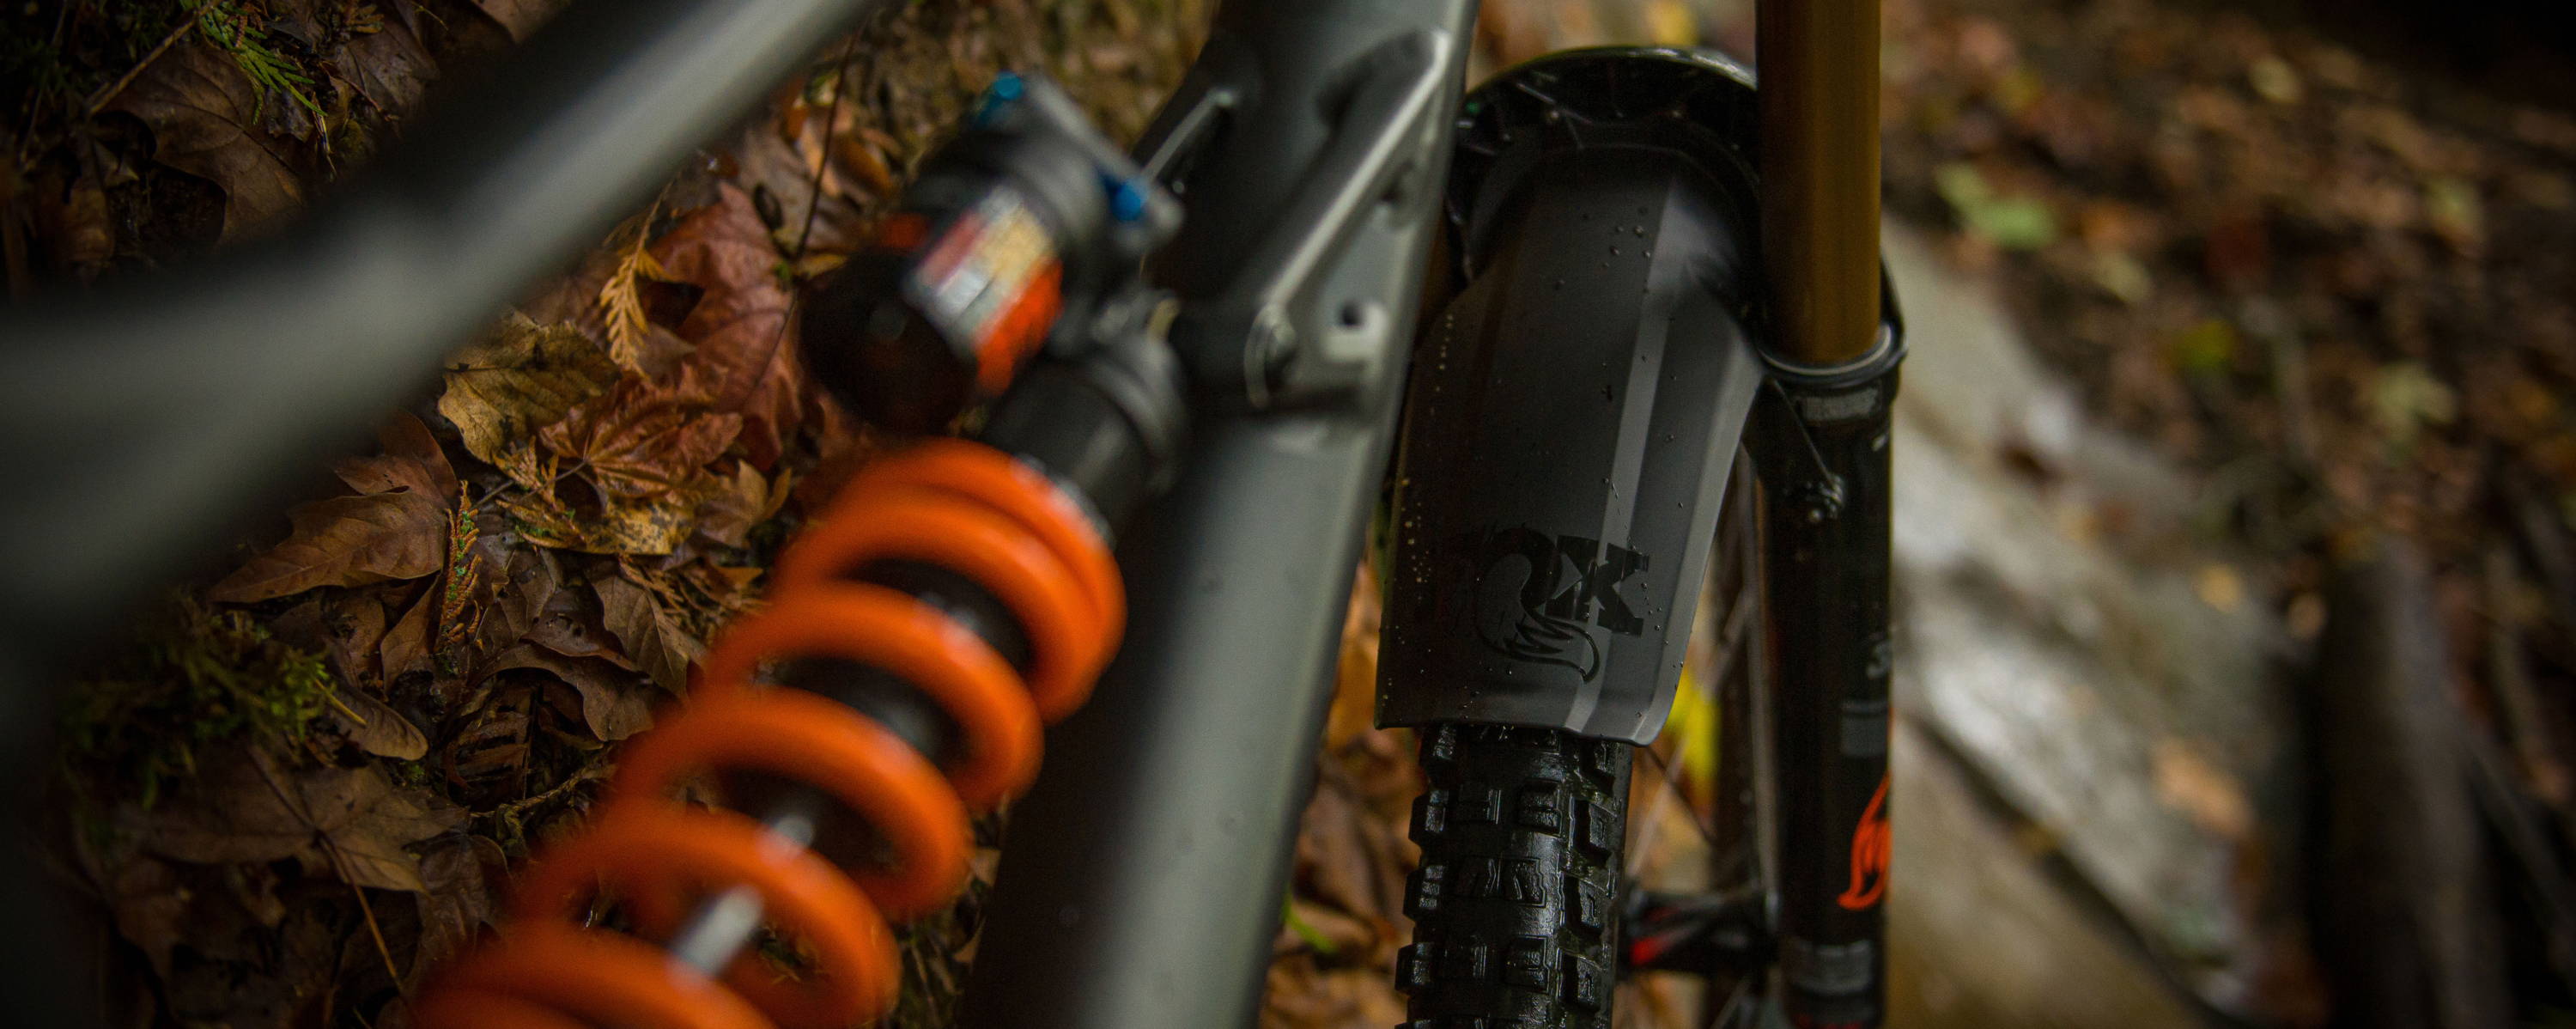 Fox 36/38 XL Mud Guard review - MBR